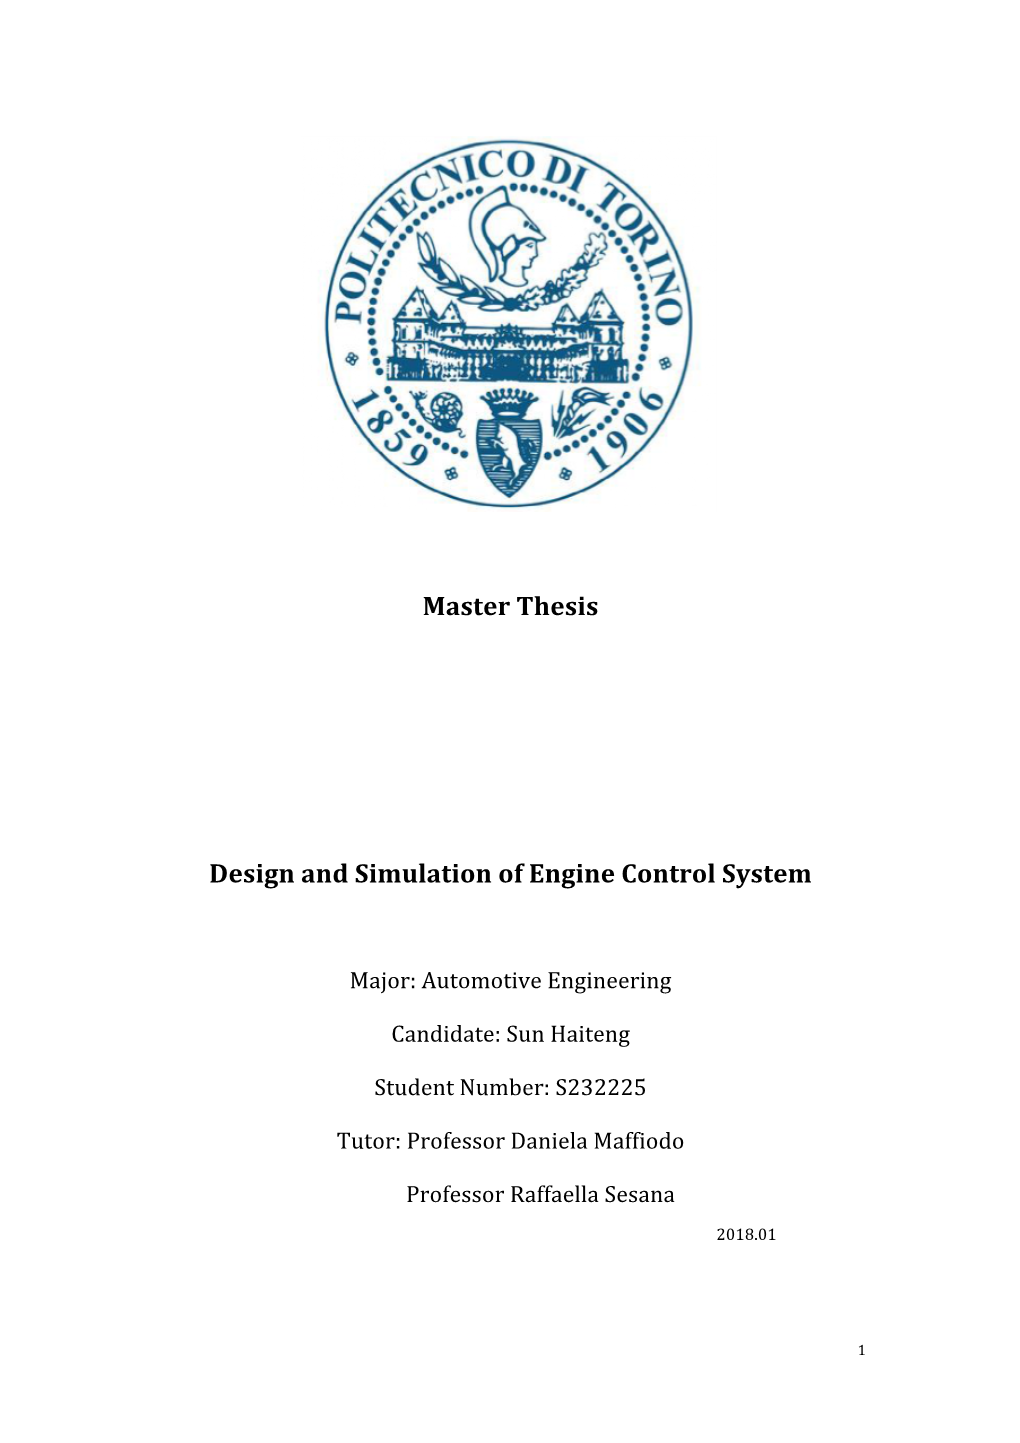 Master Thesis Design and Simulation of Engine Control System